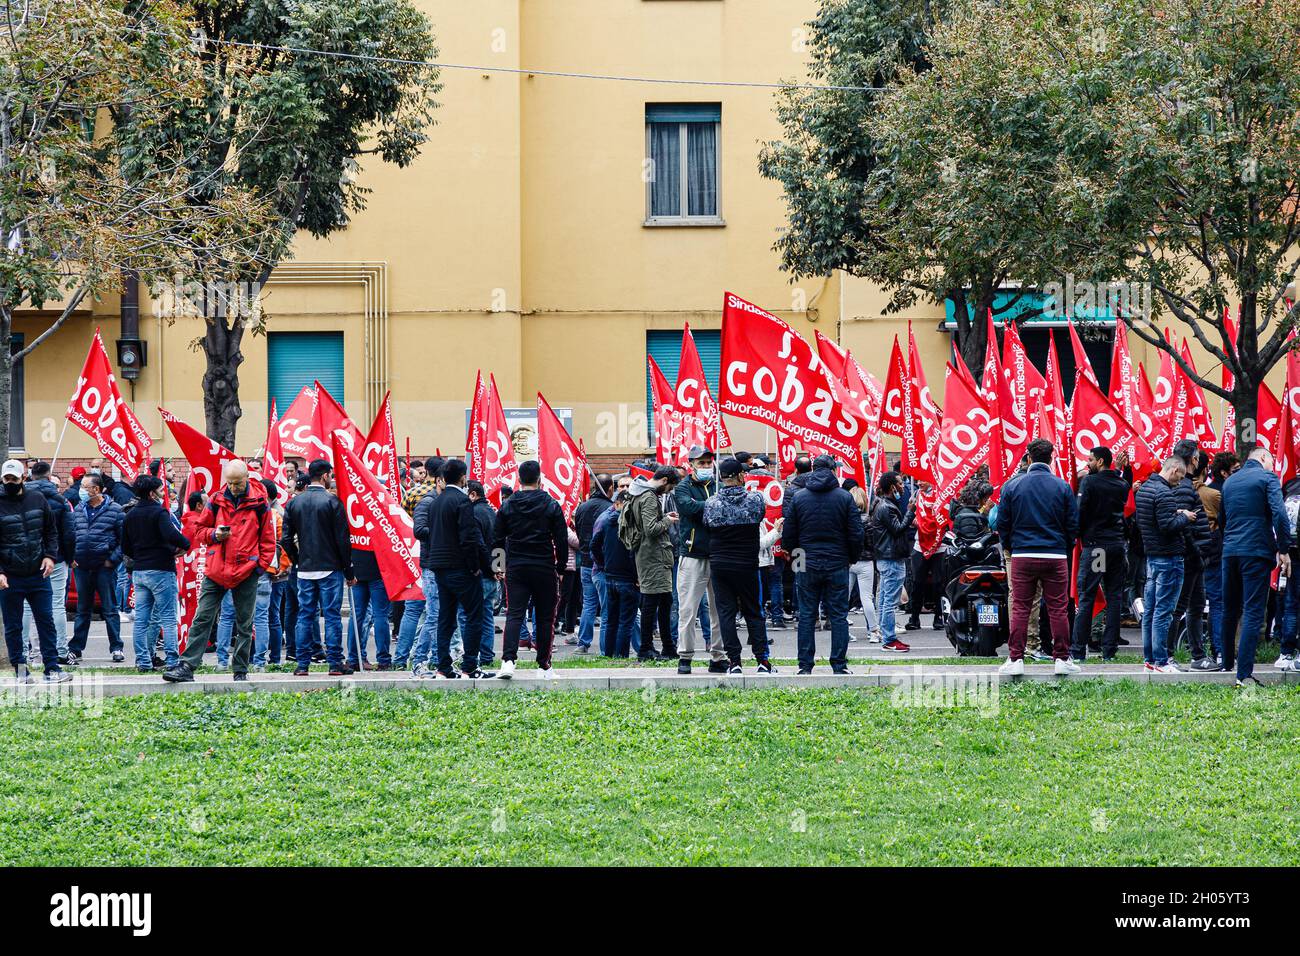 Bologna, Italy. 11th Oct, 2021. Protesters hold a COBAS flag during a  general strike called by the grassroots trade unions (Cobas, Cub, Usb)  against the Draghi government. The protest was attended by